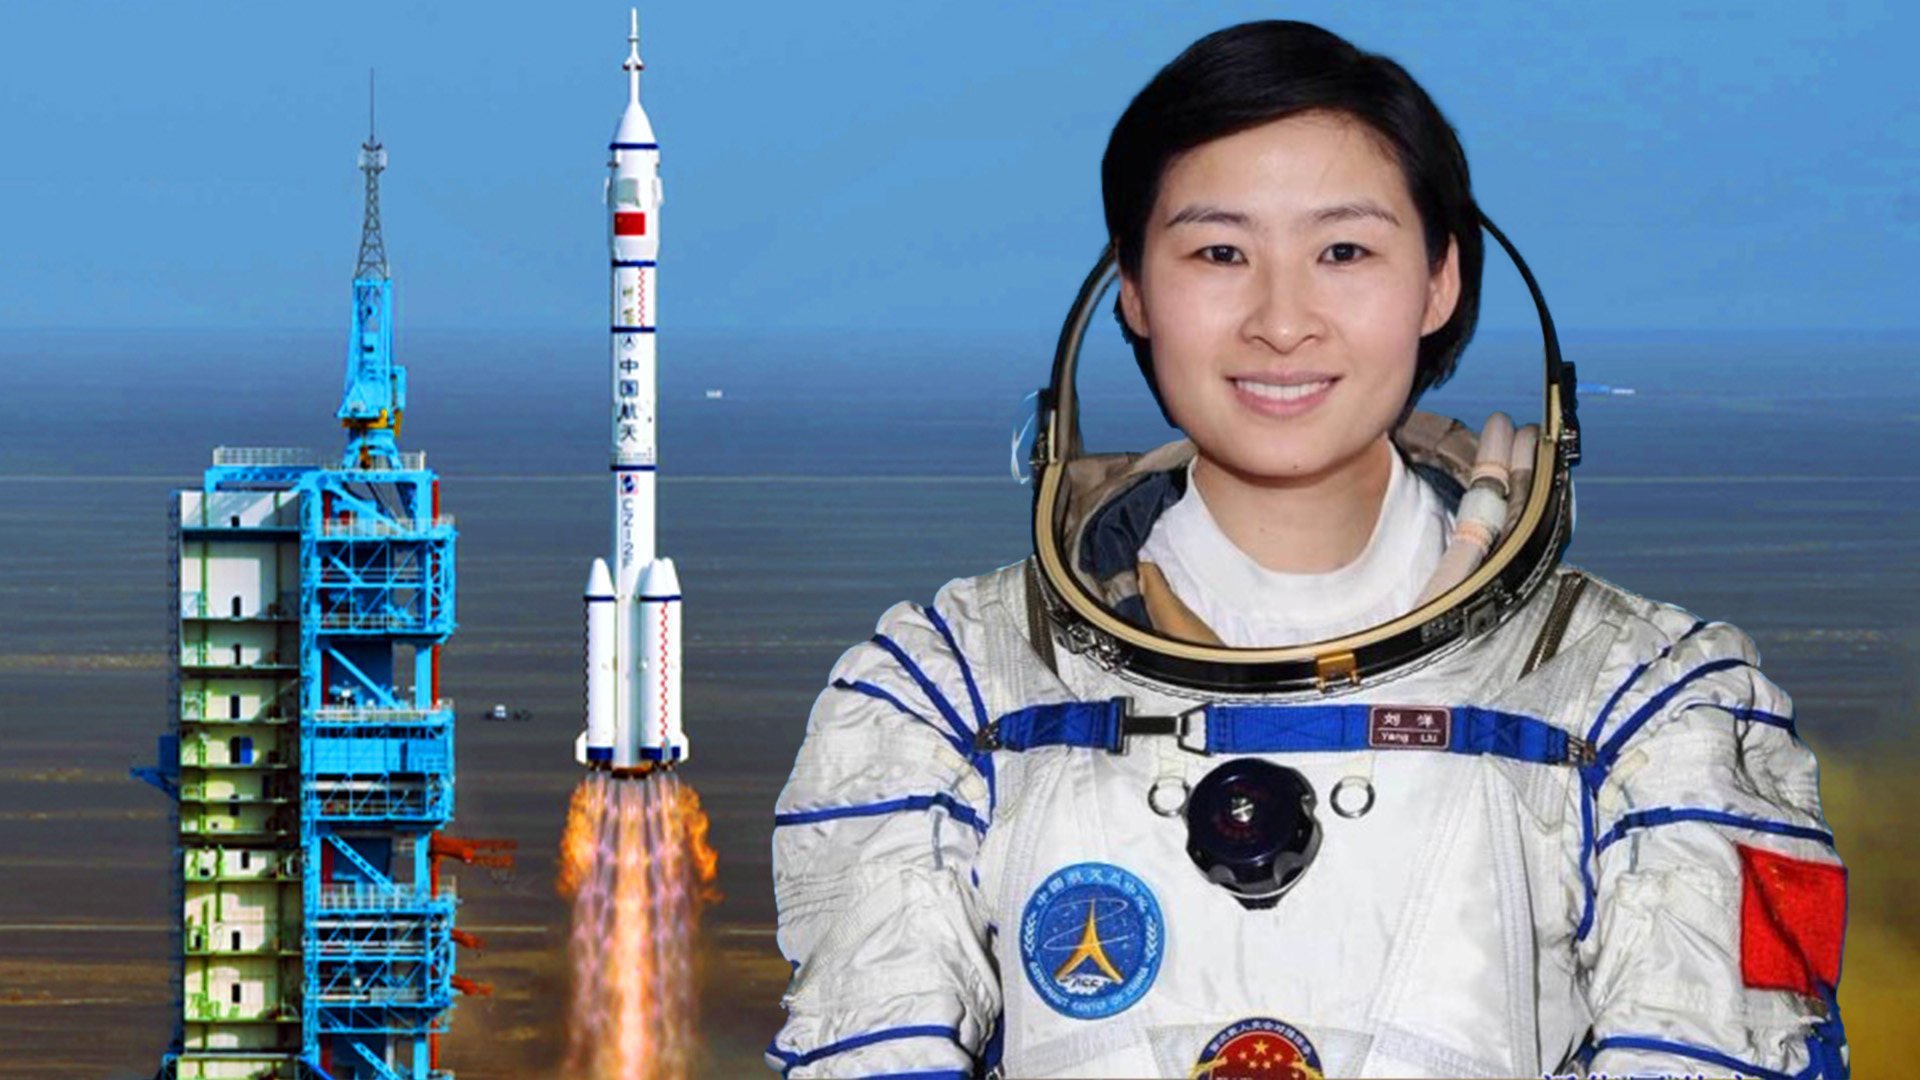 China’s first woman in space opened up on the intricacies of balancing career and family in a recent interview. Photo: SCMP composite/Weibo/spacechina.com